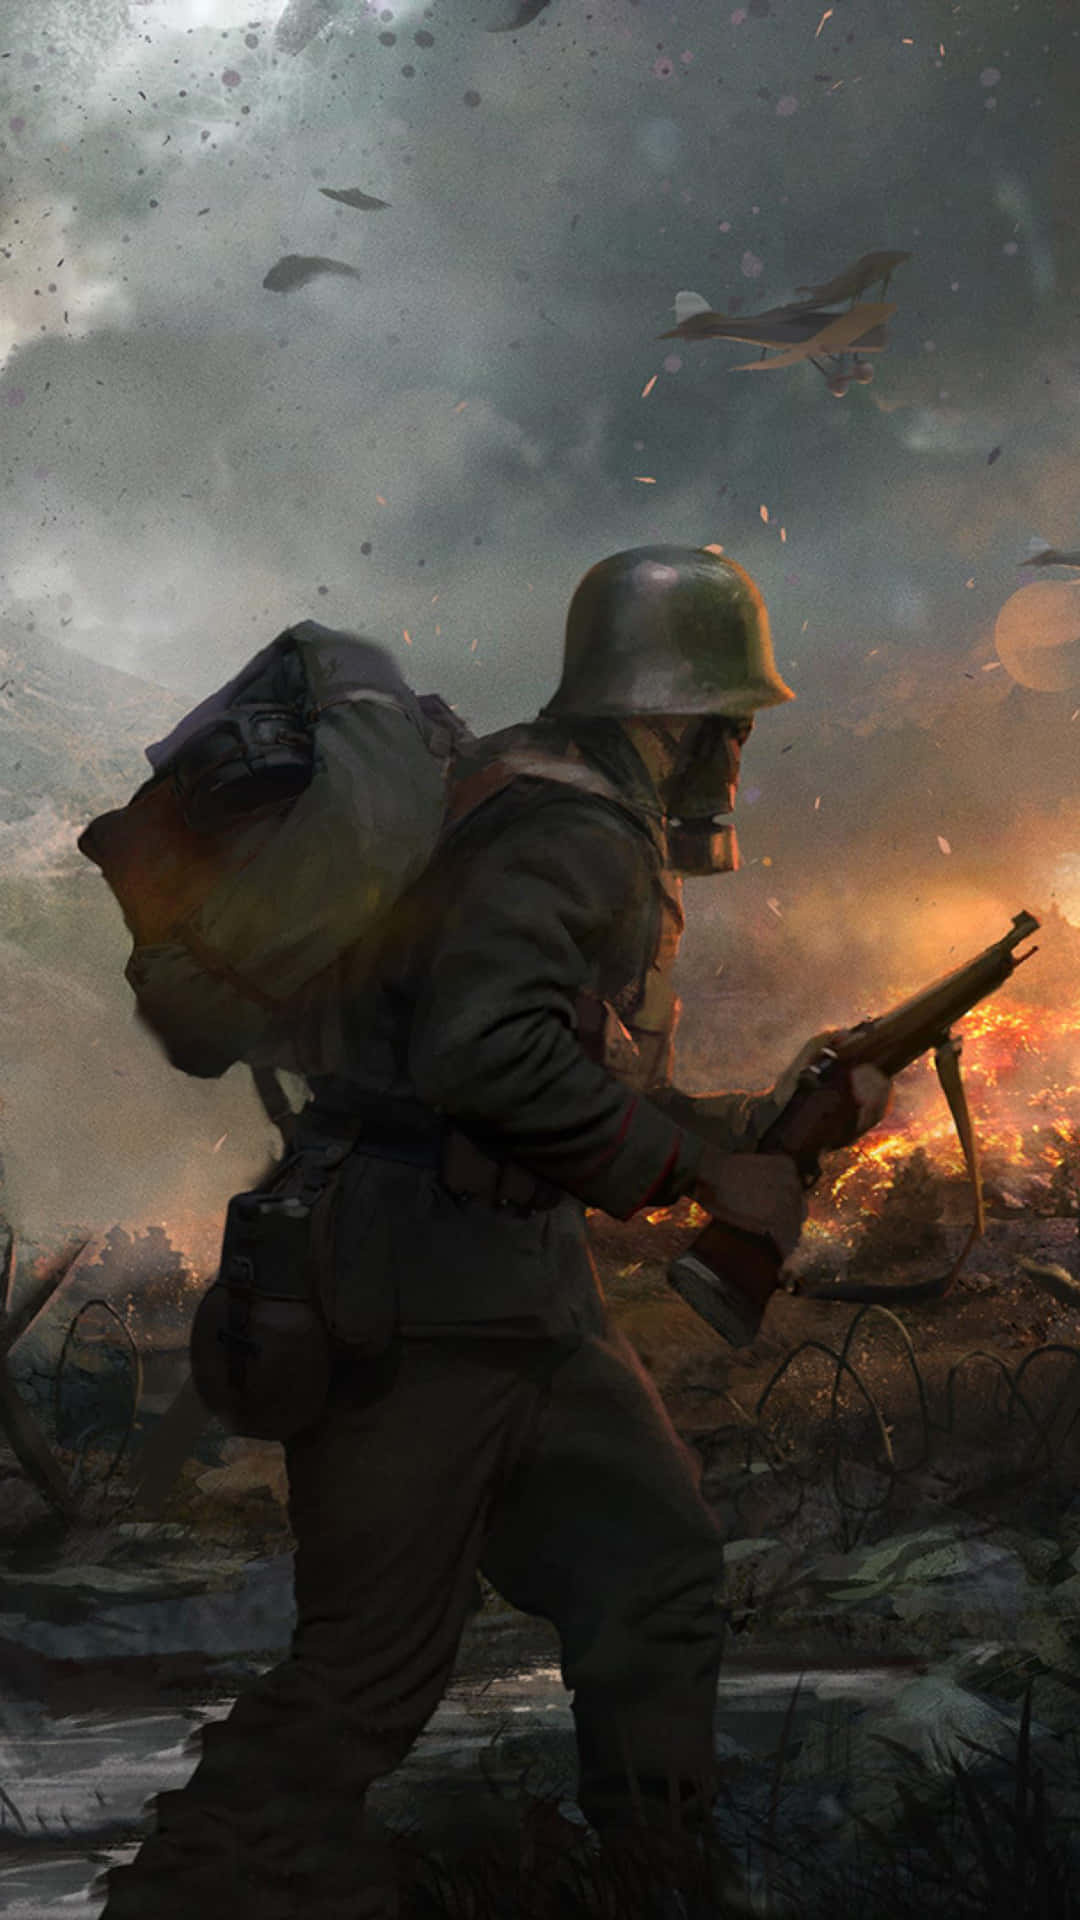 Get ready to experience the next level of gaming on the Battlefield Phone Wallpaper